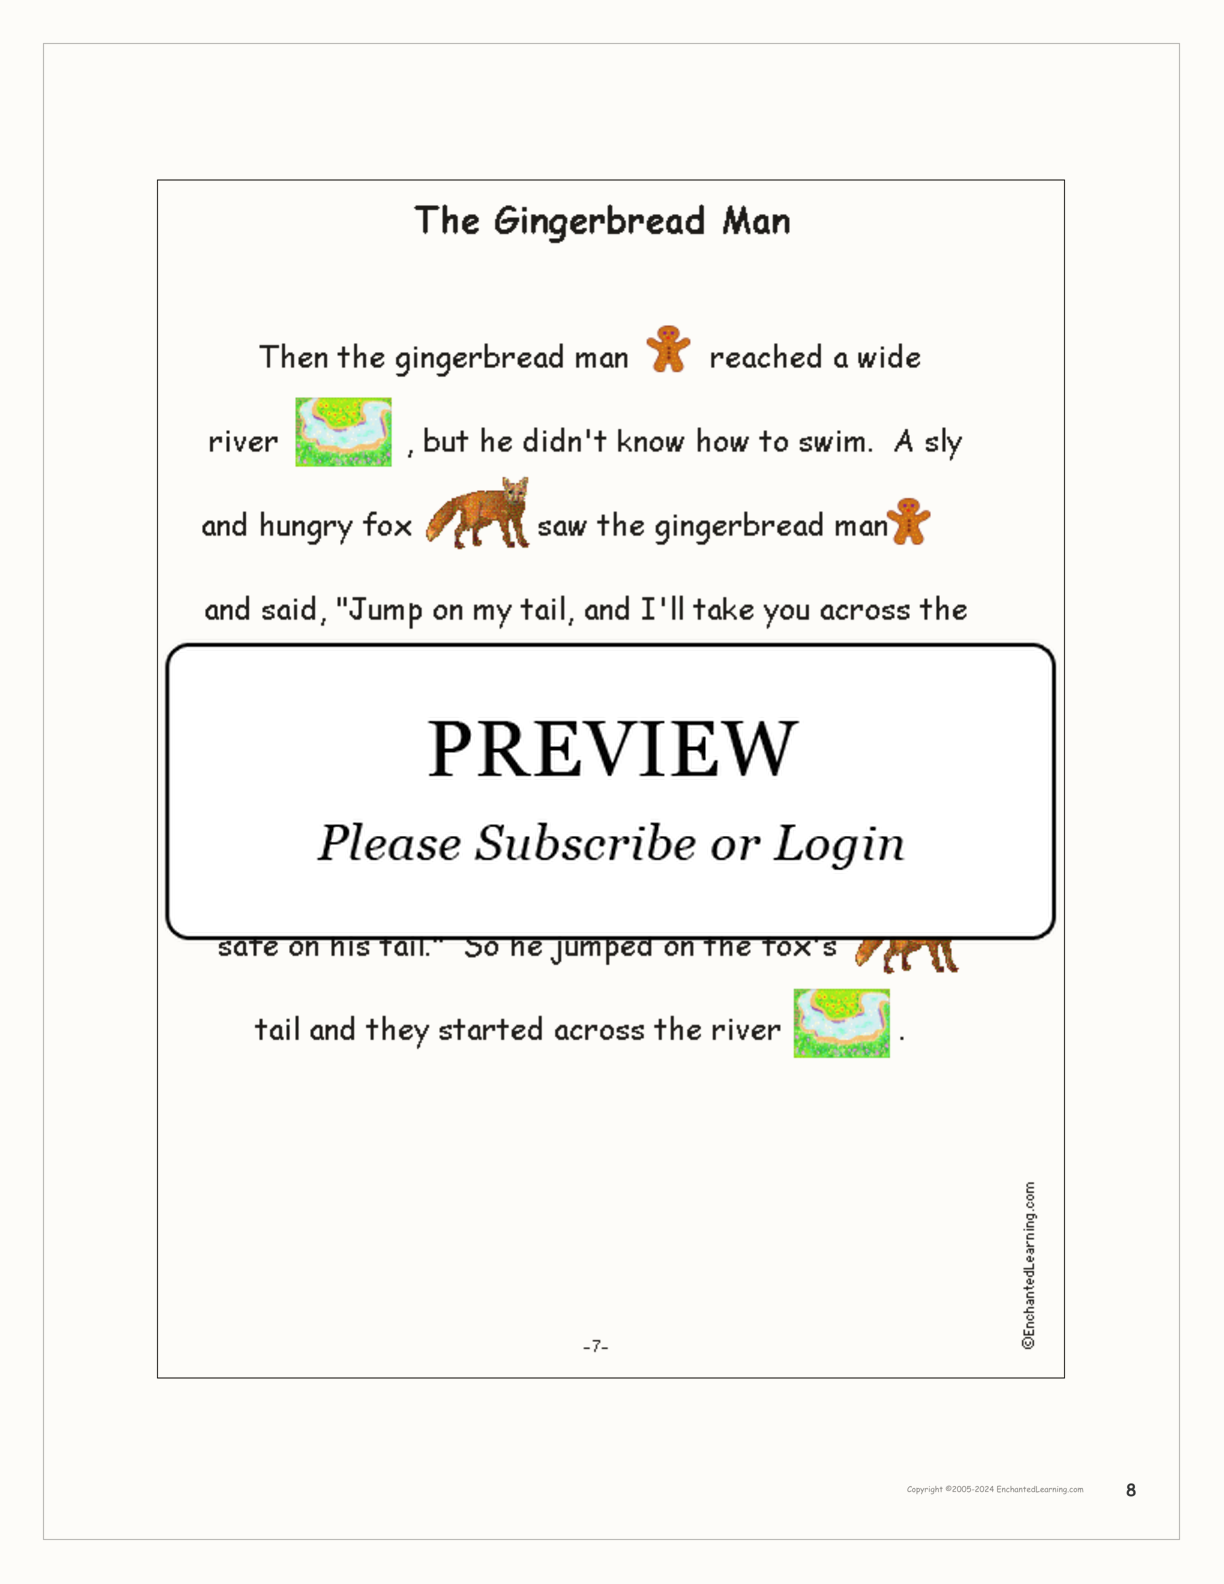 'The Gingerbread Man' Book interactive printout page 8